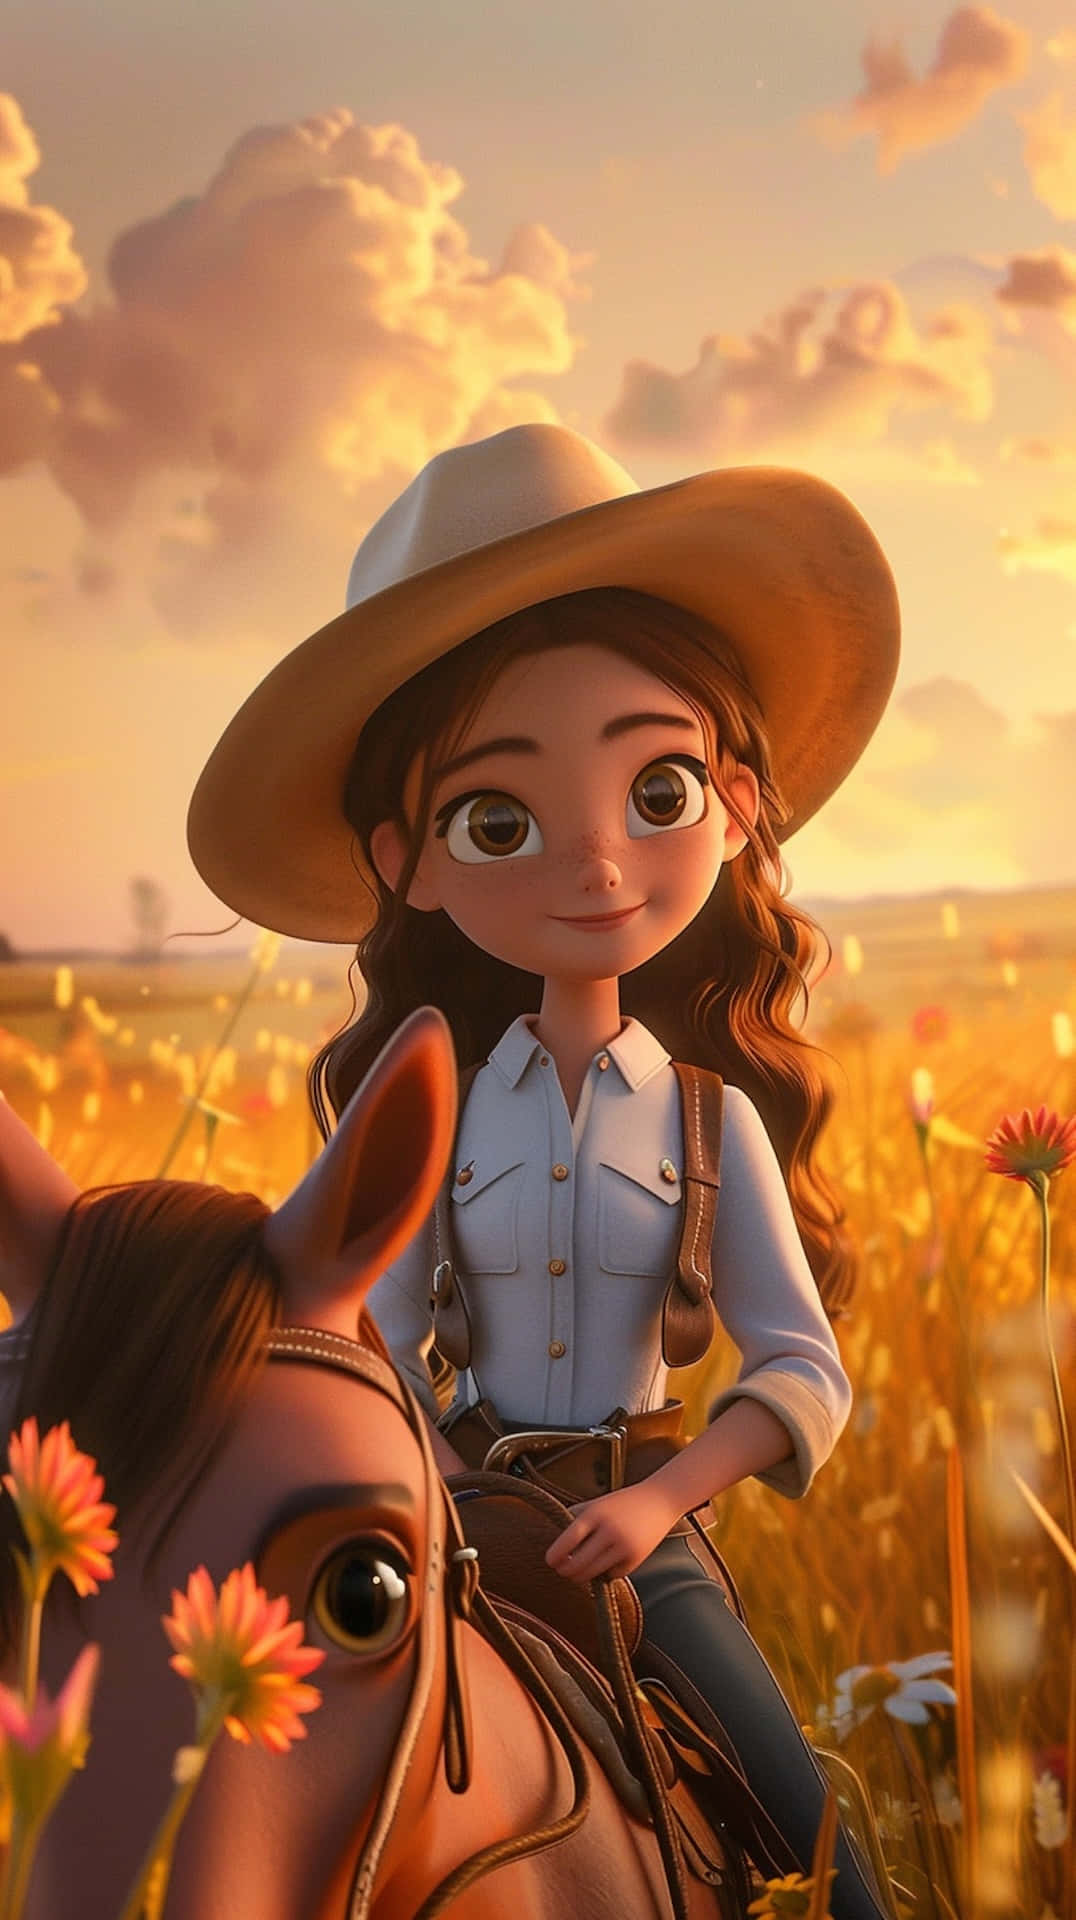 Animated Cowgirl Sunset Ride Wallpaper